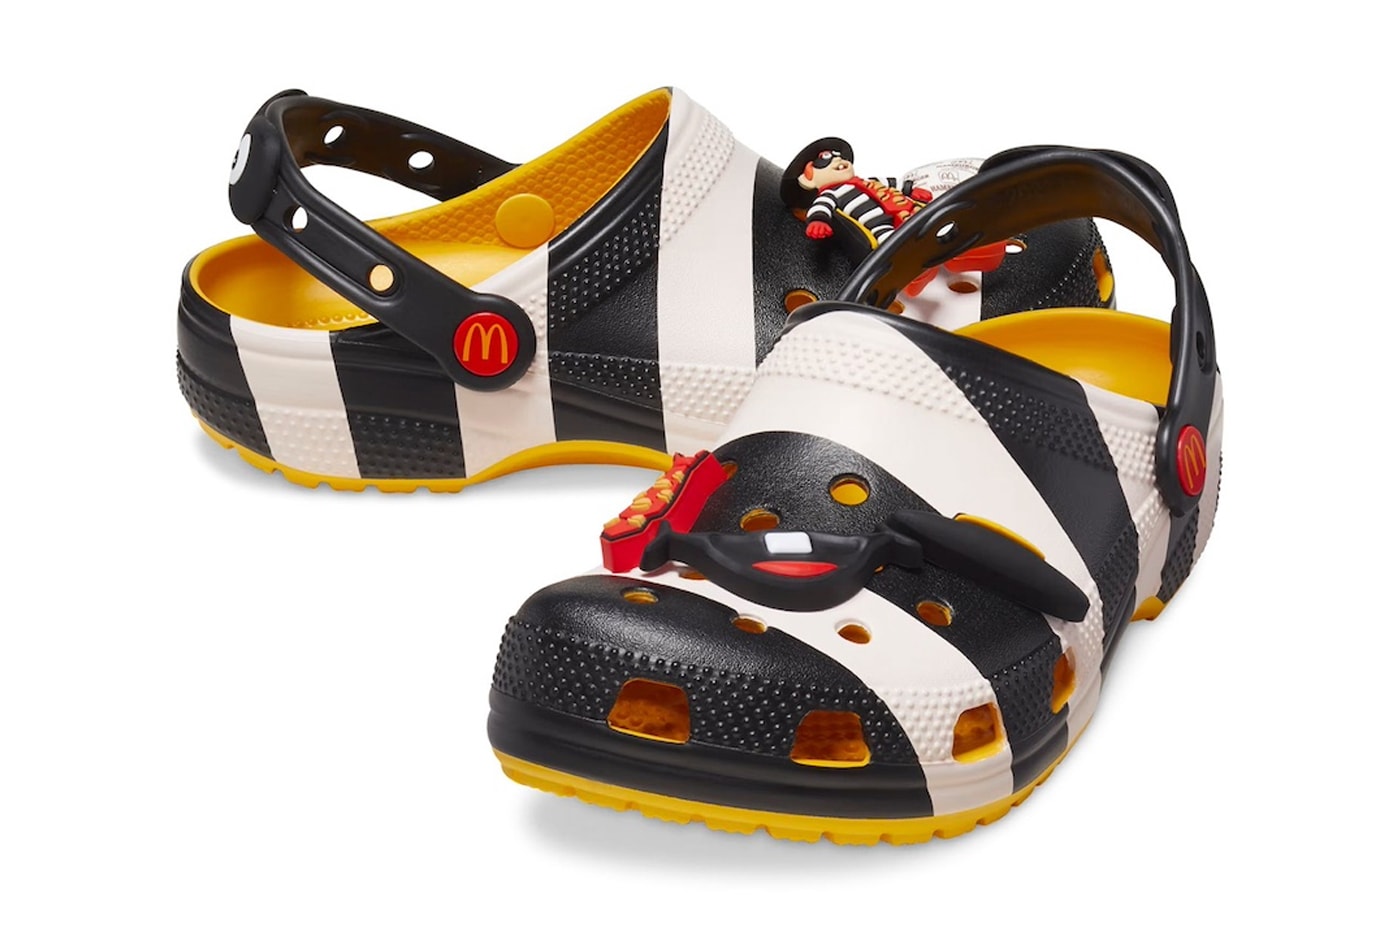 McDonald's x Crocs Collection Is Dropping This Week classic clog Red/Yellow-White 209858-90H birdie 208696-730 hamburglar Black/White-Yellow 209393-066 cozzzy sandal grimace purple black 209392-510 